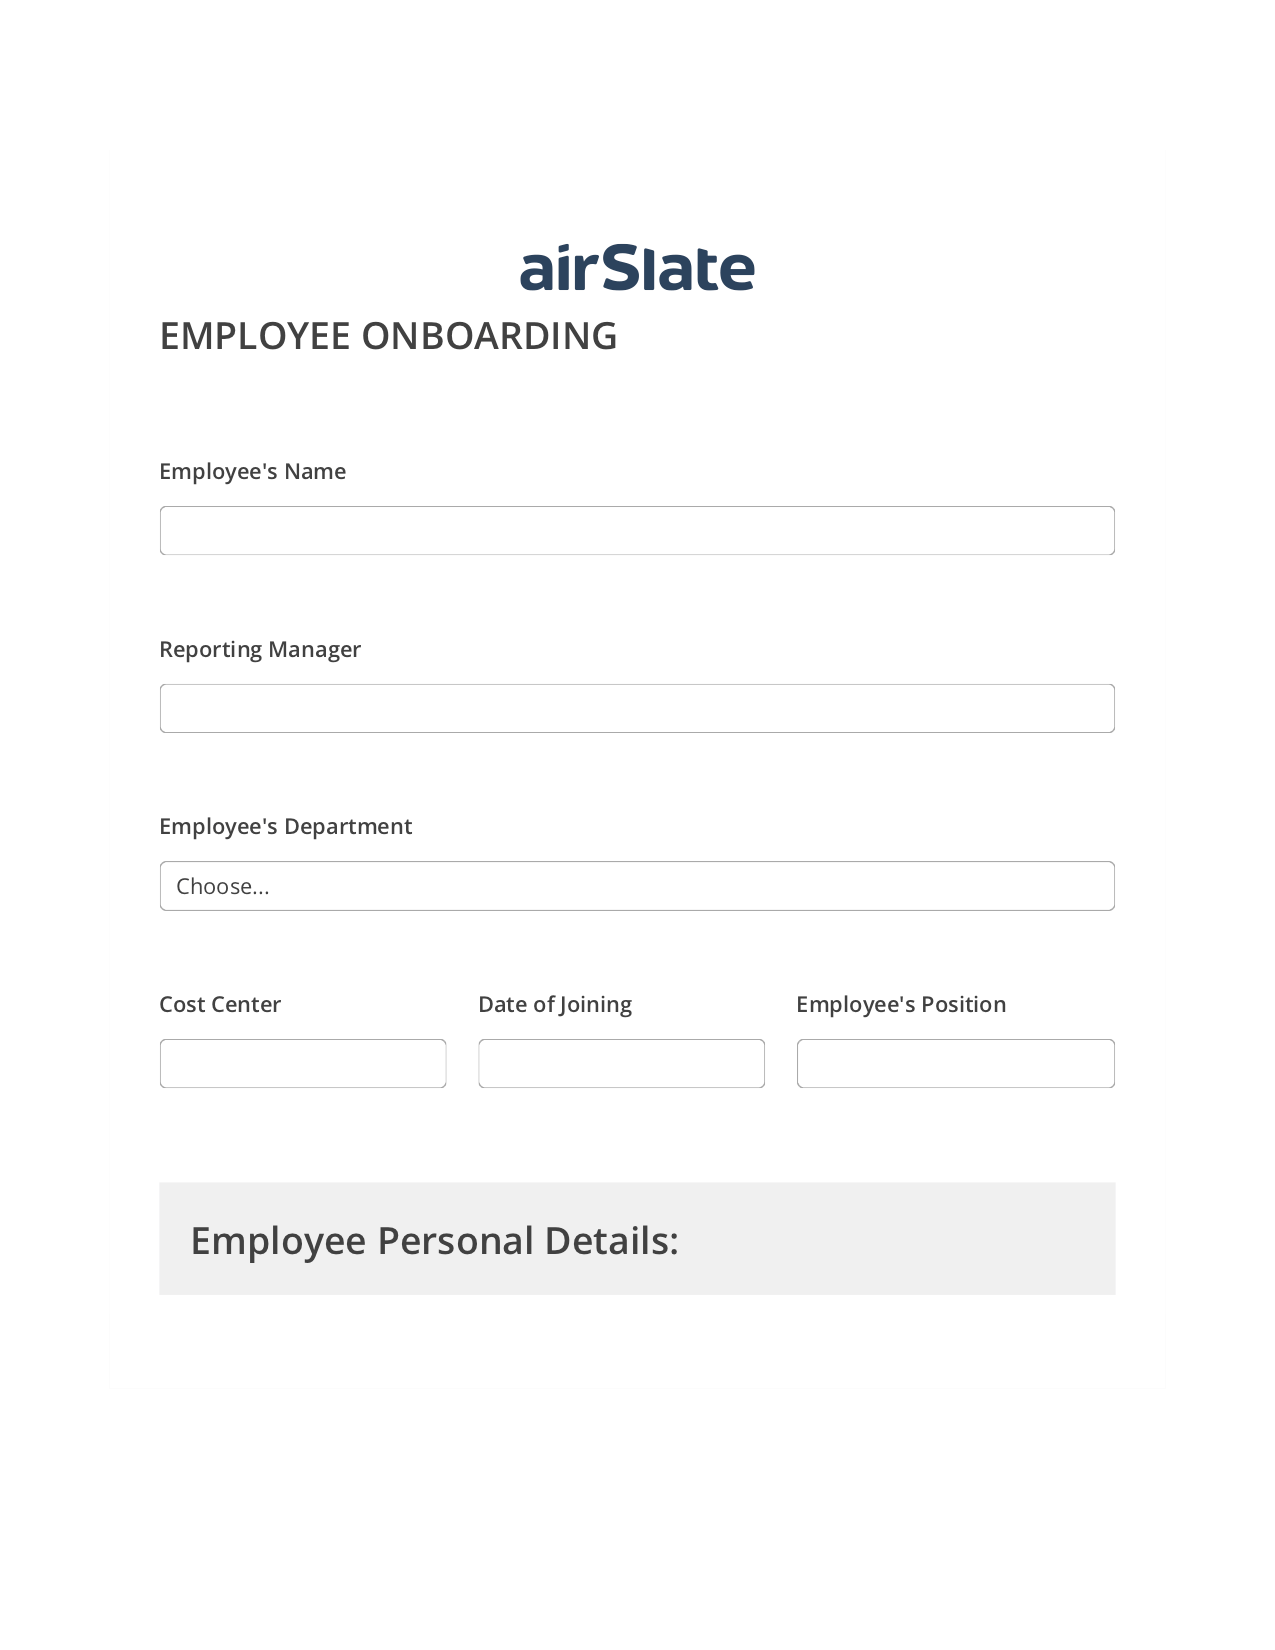 Employee Onboarding Workflow Pre-fill Slate from MS Dynamics 365 record, Unassign Role Bot, Webhook Postfinish Bot